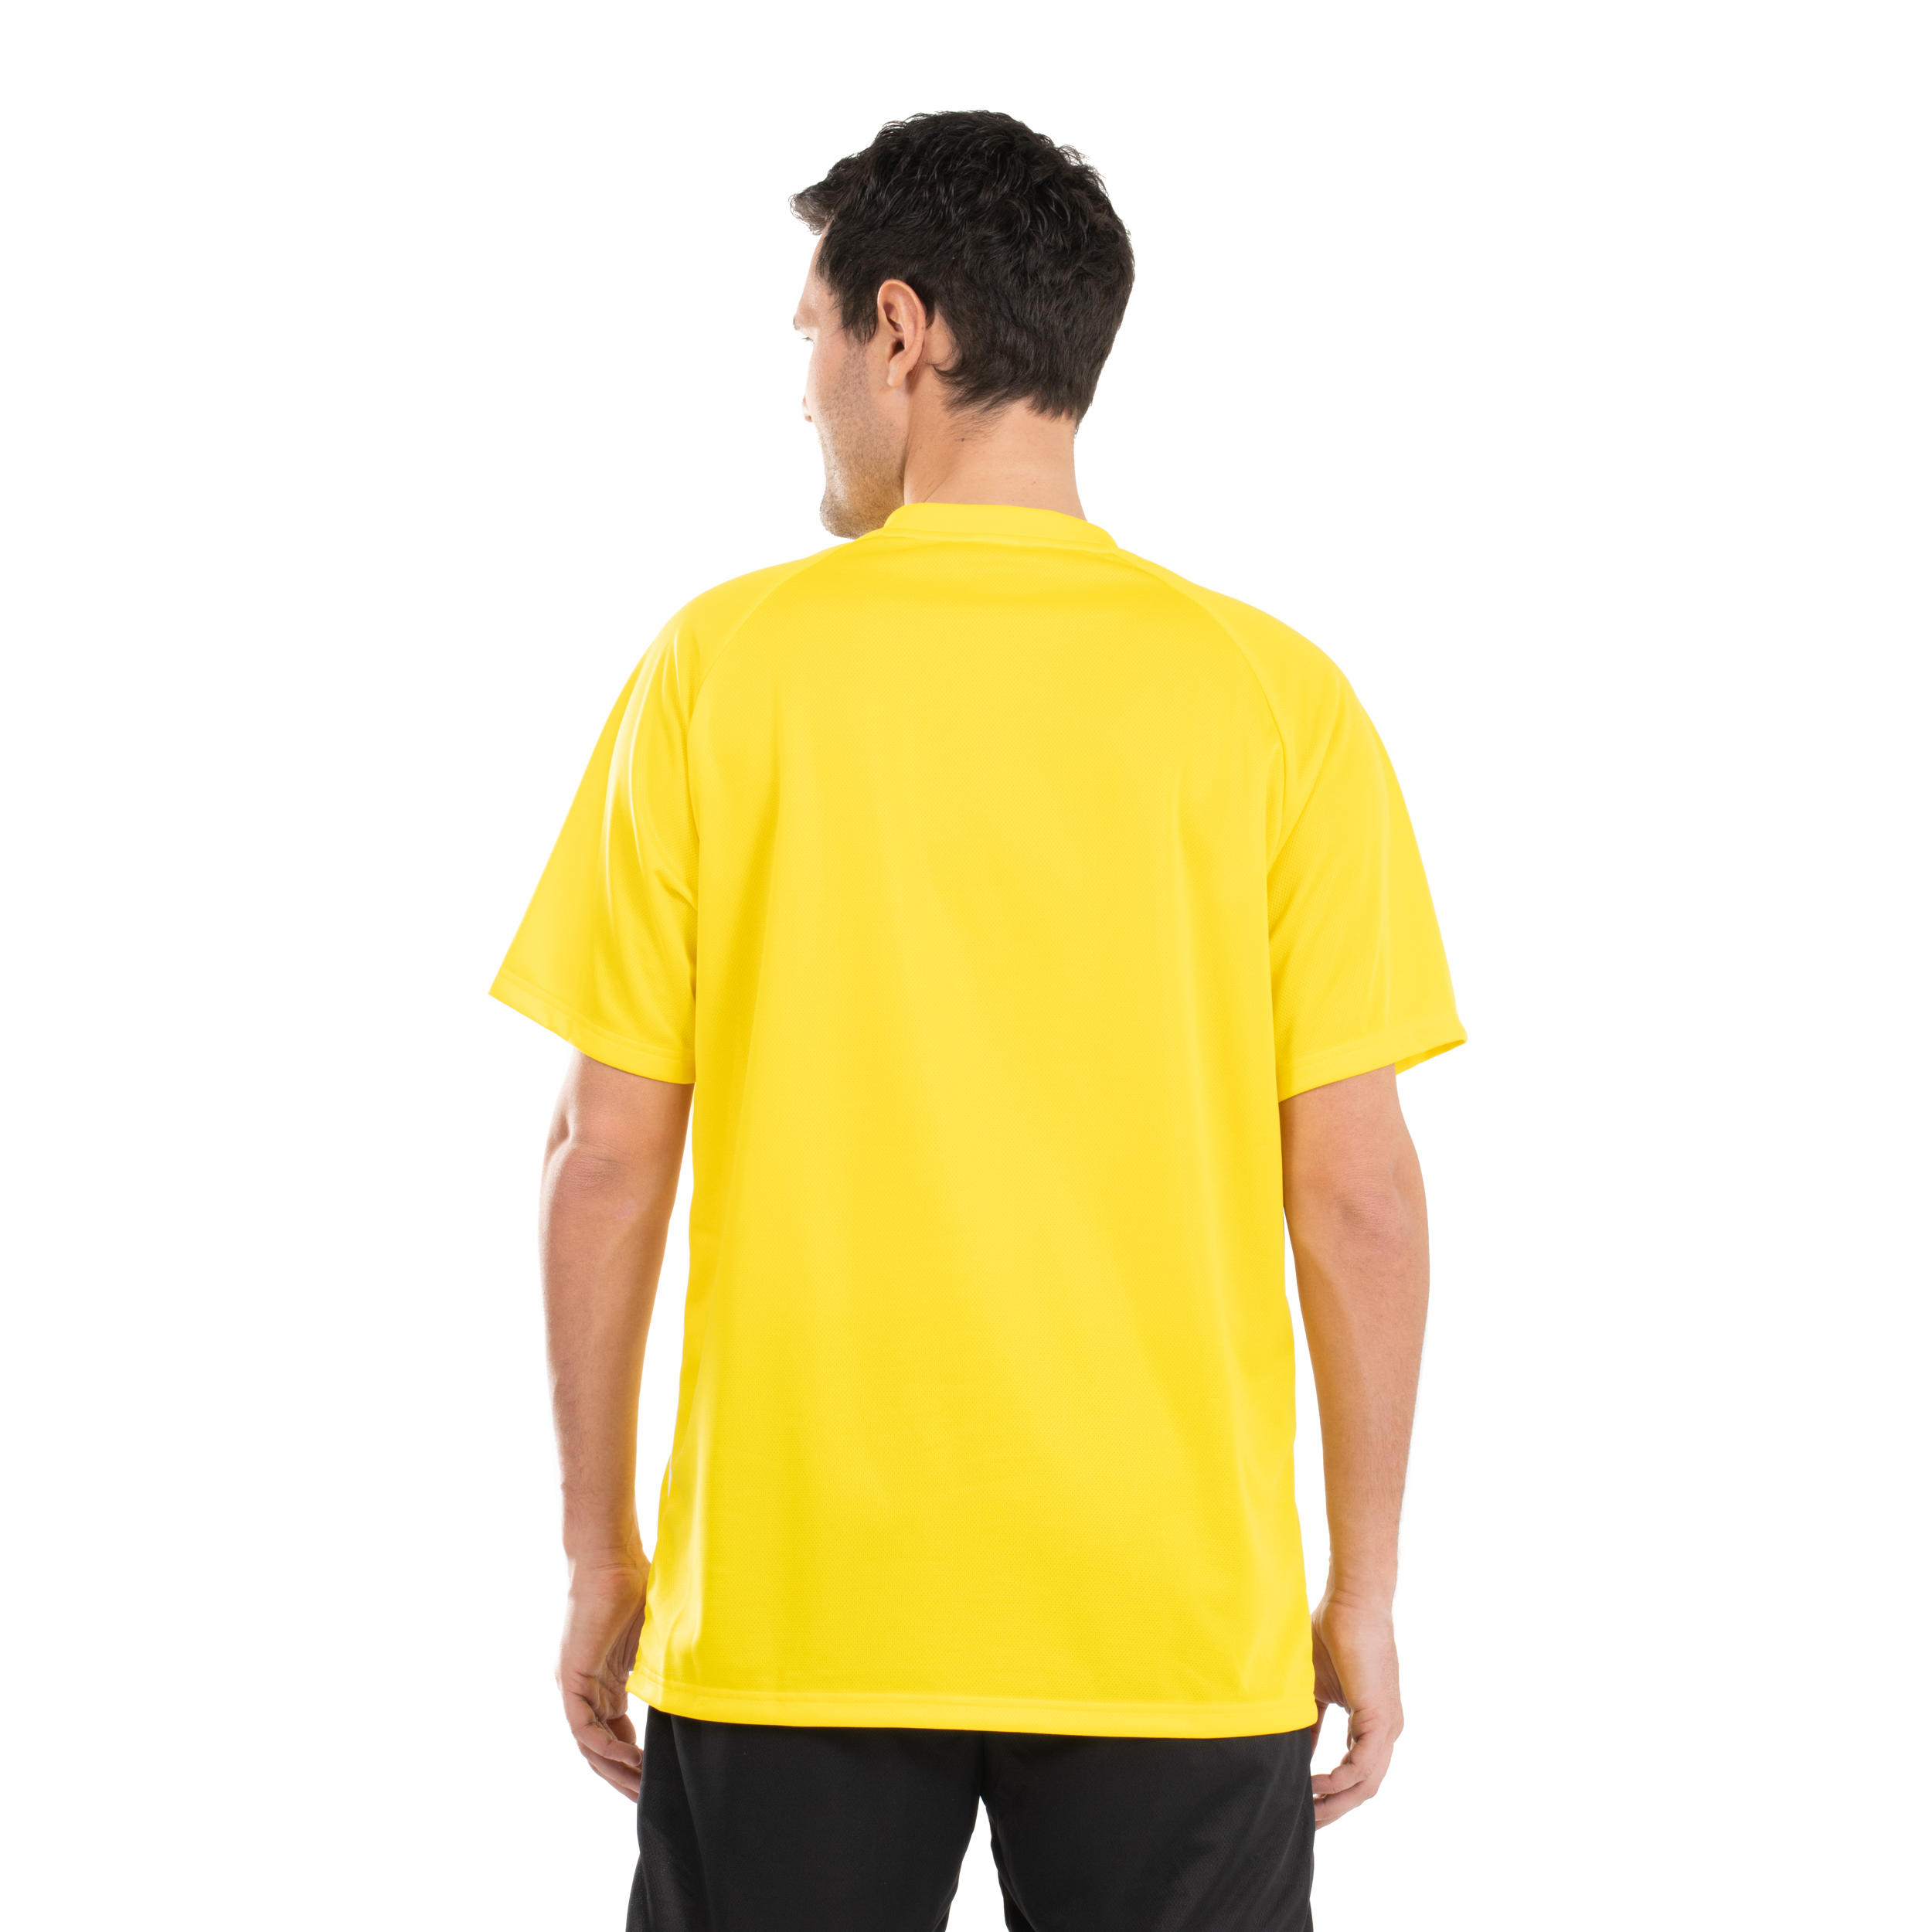 V100 Volleyball Jersey - Yellow 4/8